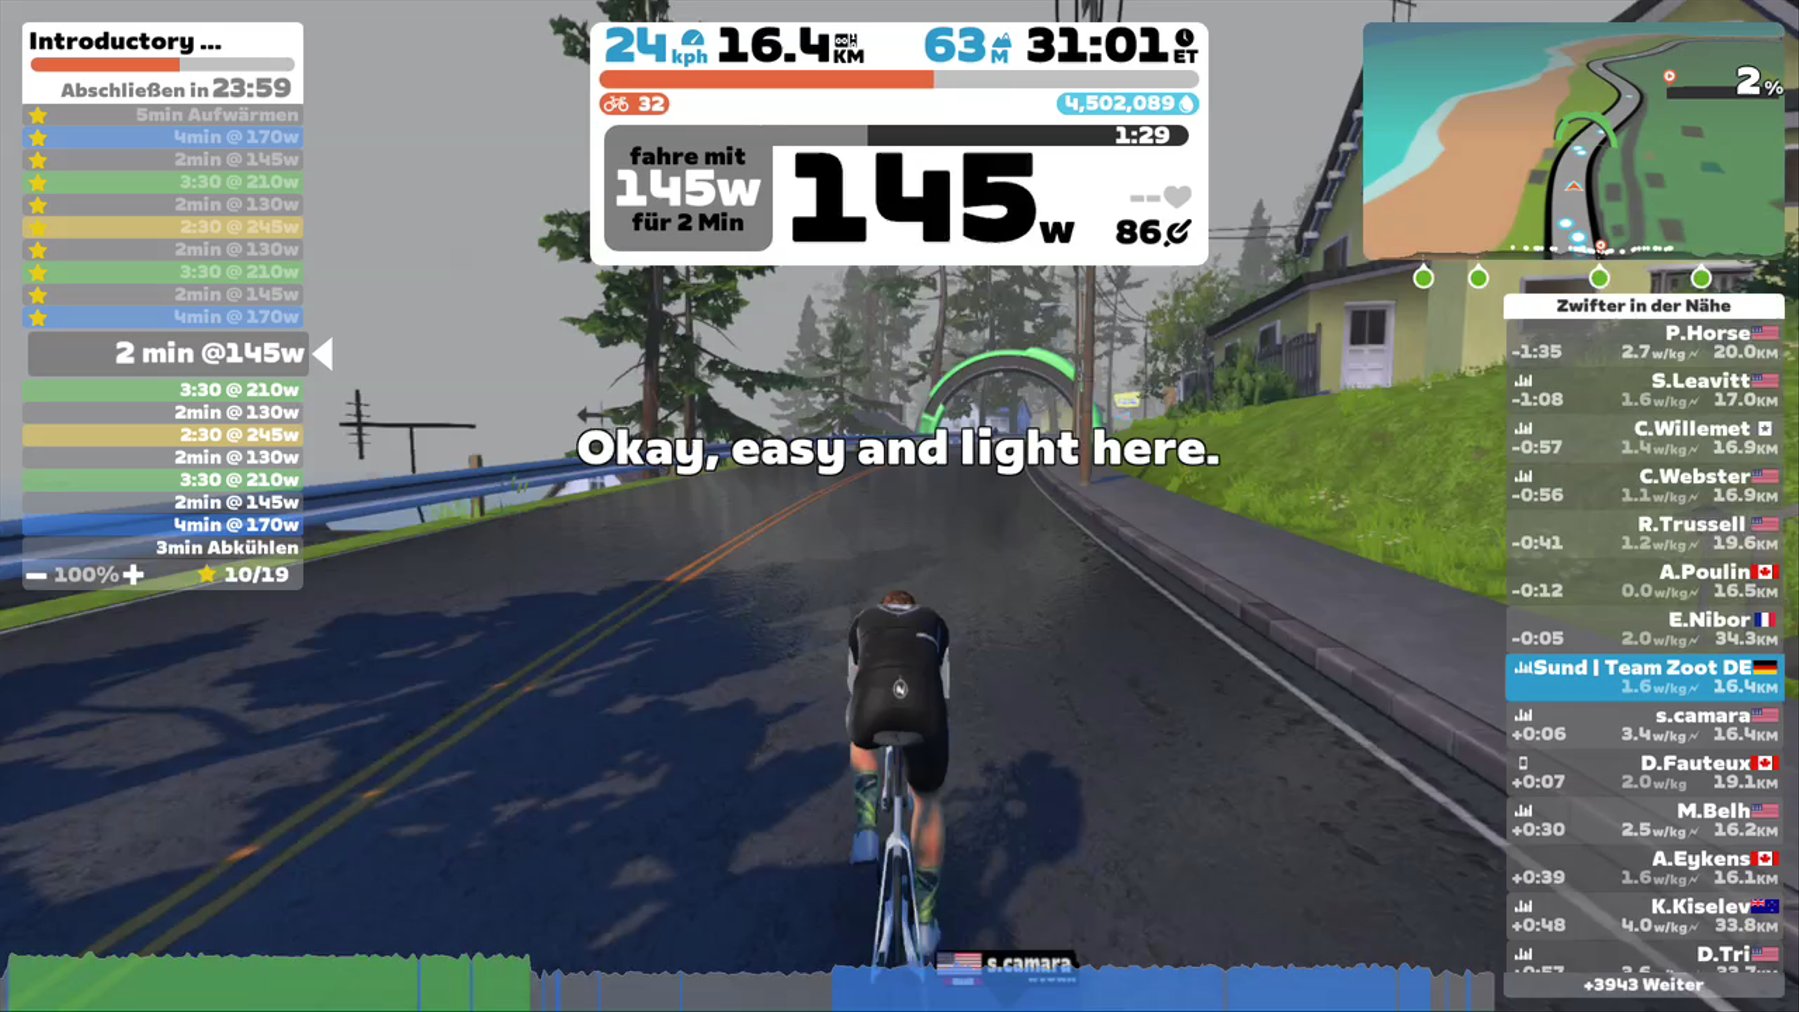 Zwift - Introductory Intervals in Watopia